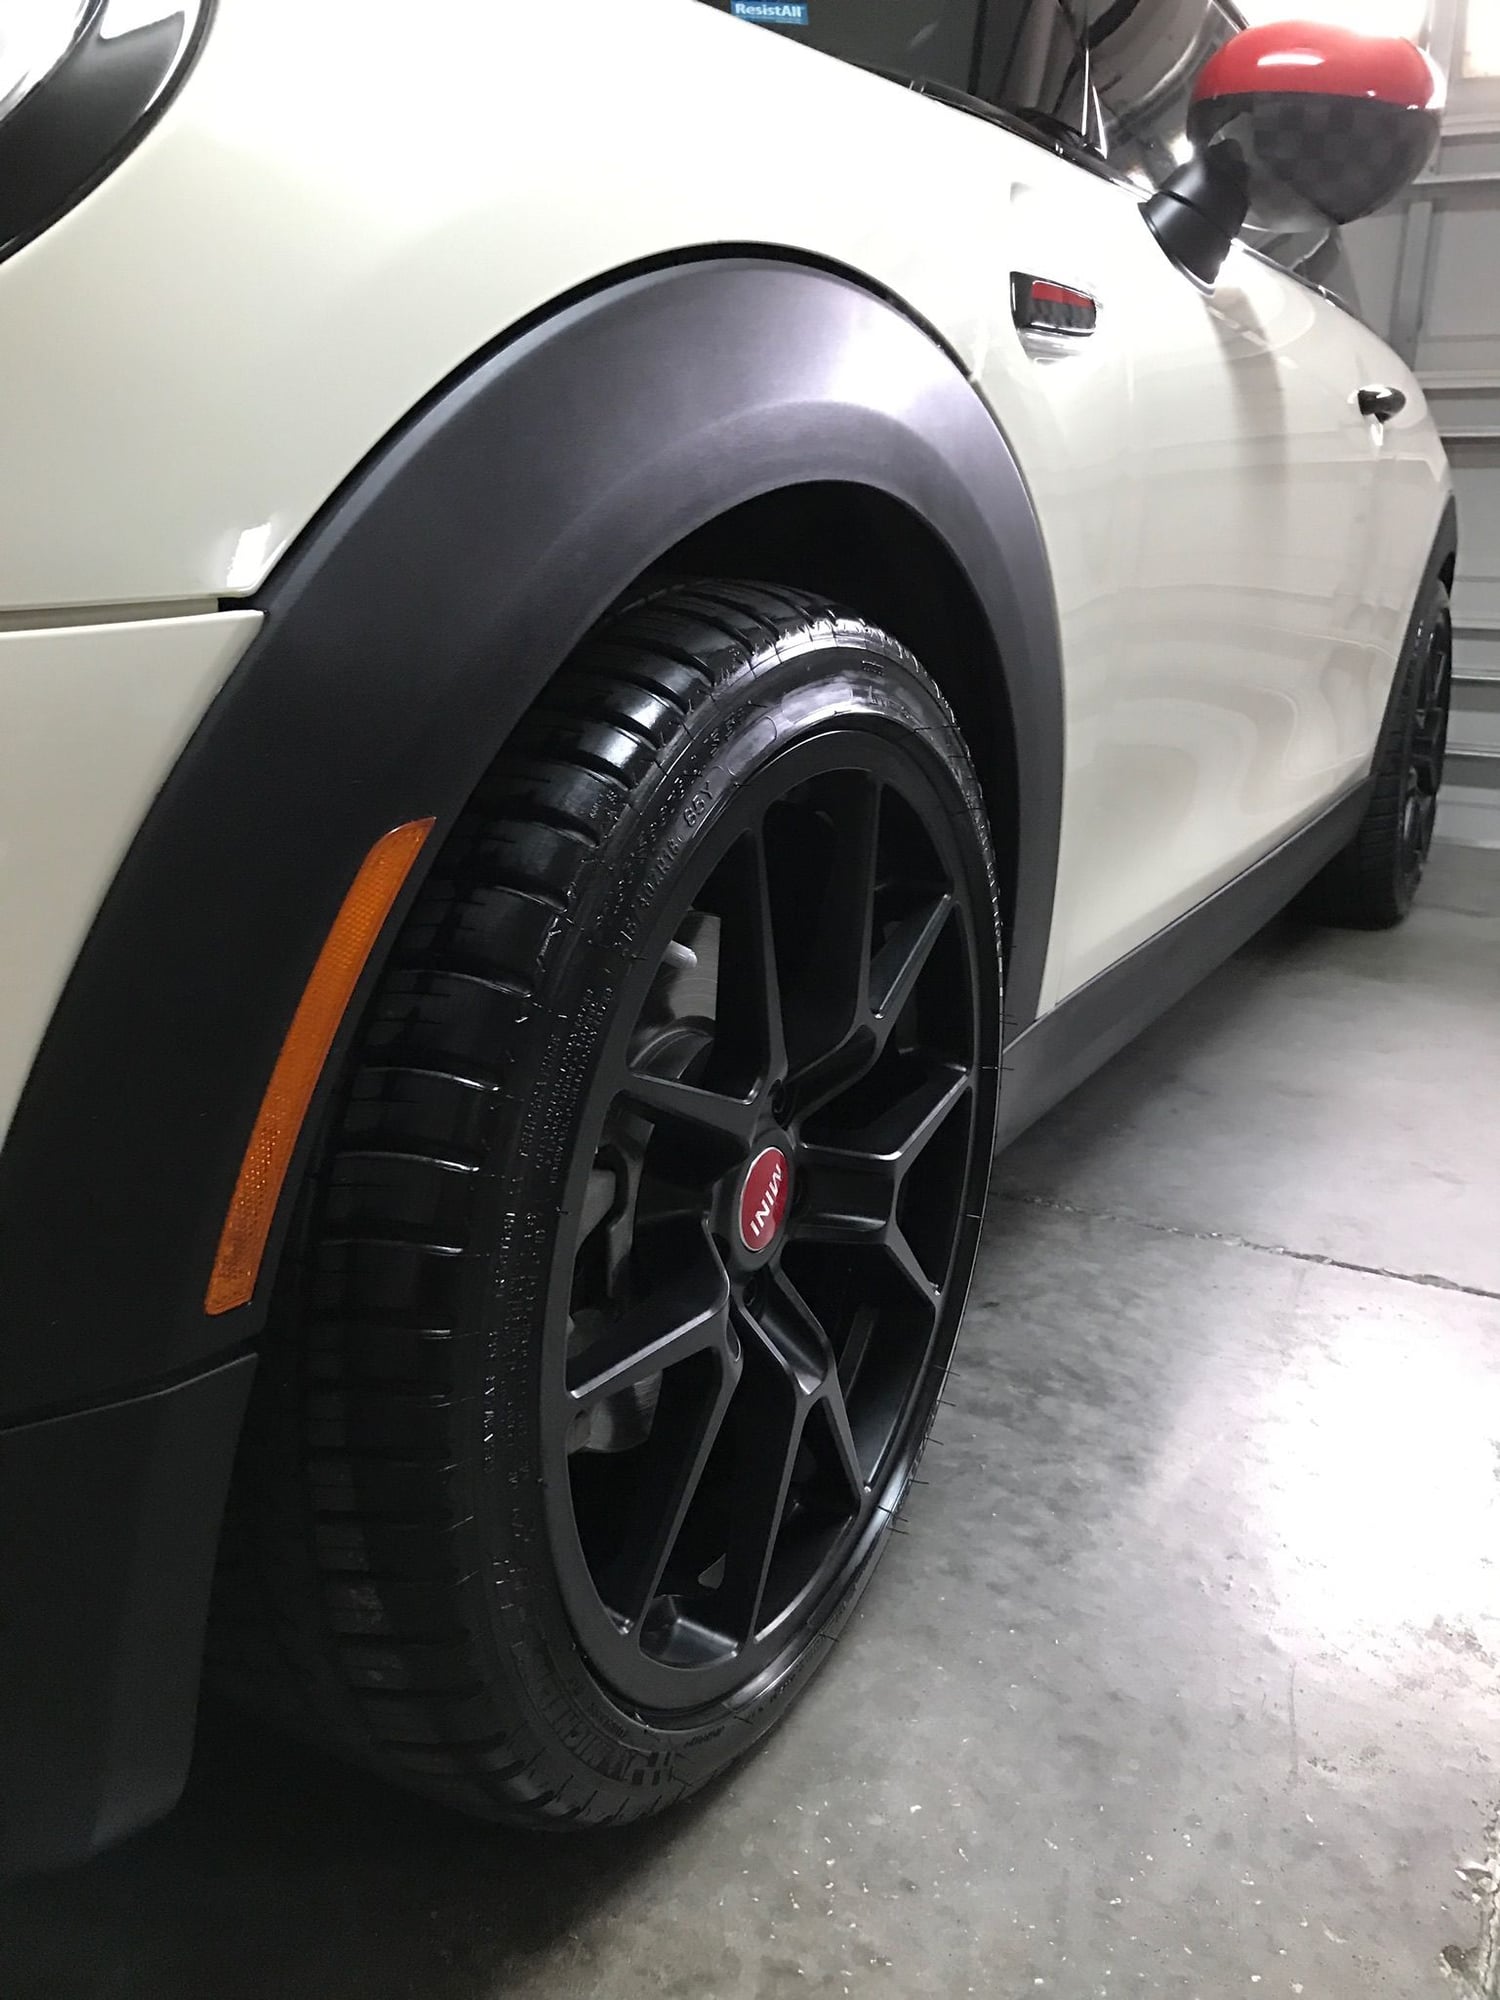 Official F56 Wheel Fitment Thread - Page 33 - North American Motoring